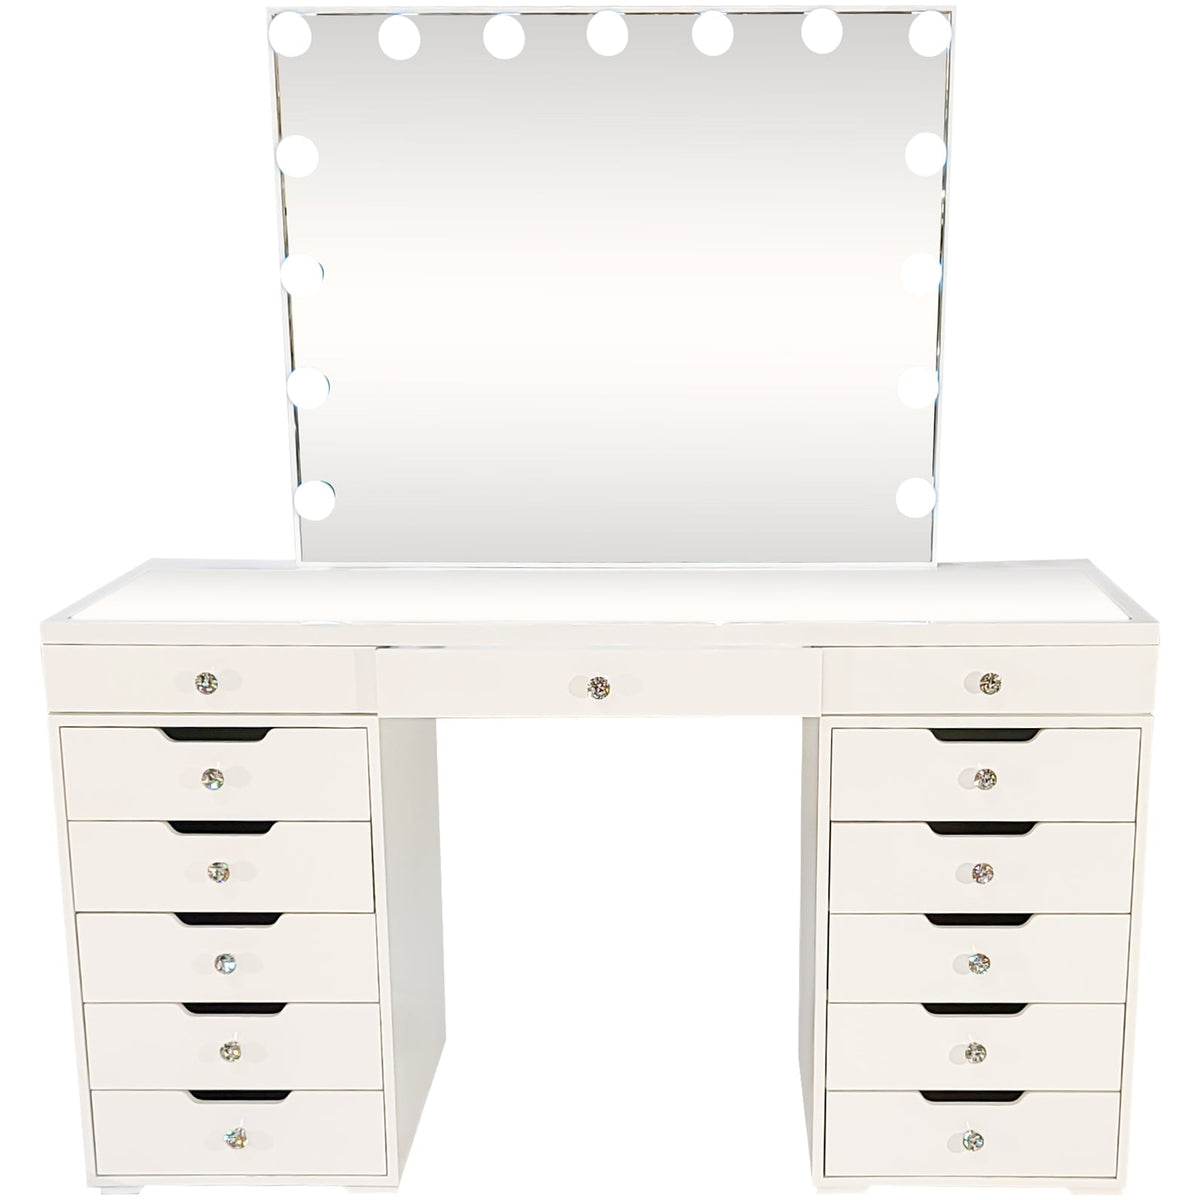 Diva White Large Vanity Table + Mirror with Storage and Bluetooth By  Furniture City - Furniture City